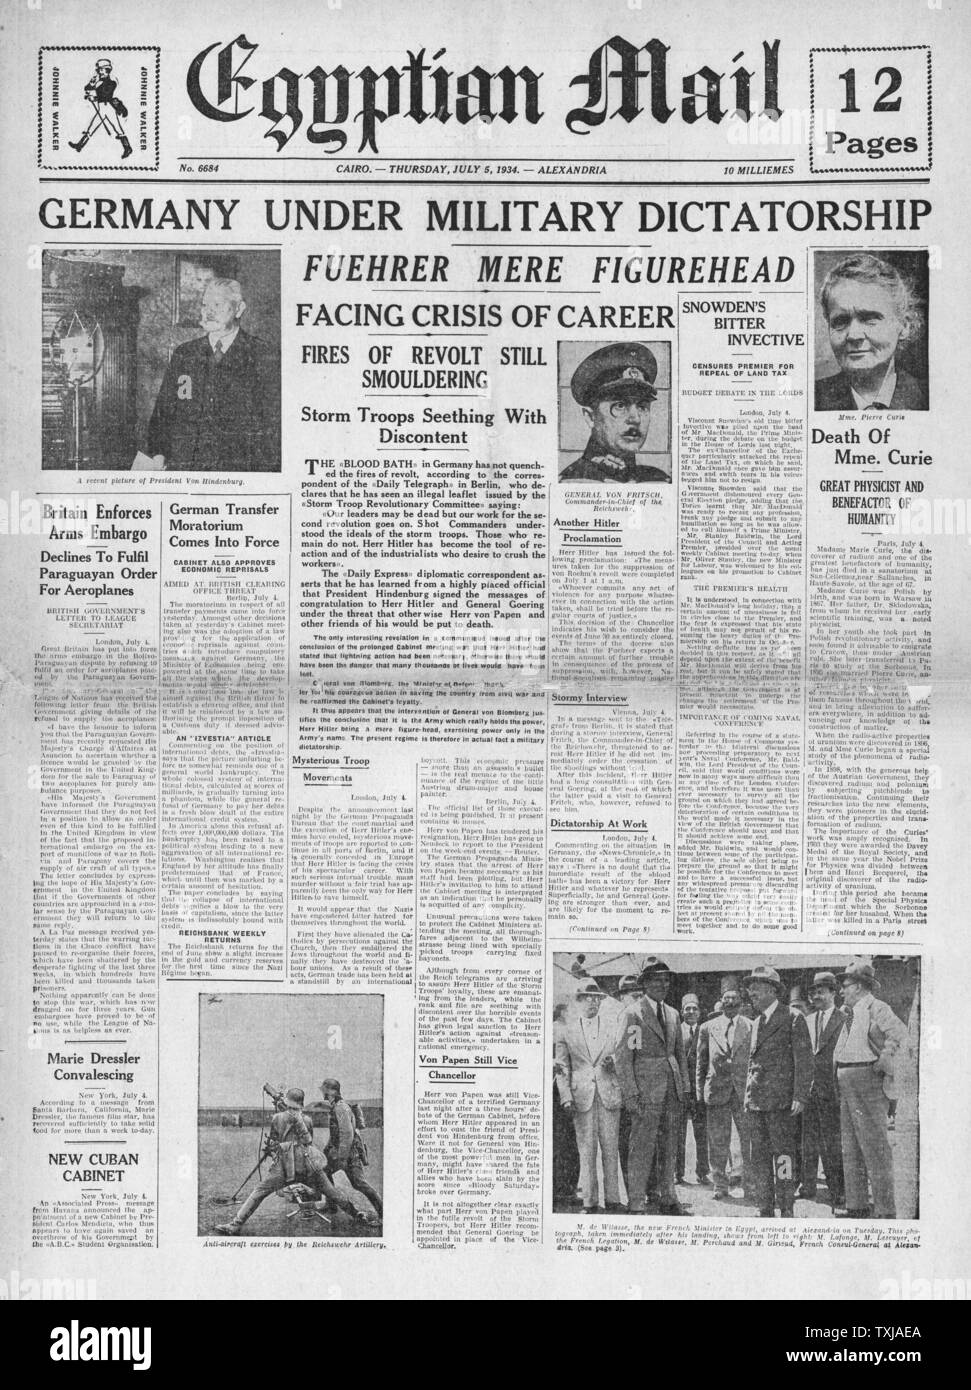 1934 The Egyptian Mail newspaper front page the death of Marie Curie and Adolf Hitler and night of the long knives Stock Photo